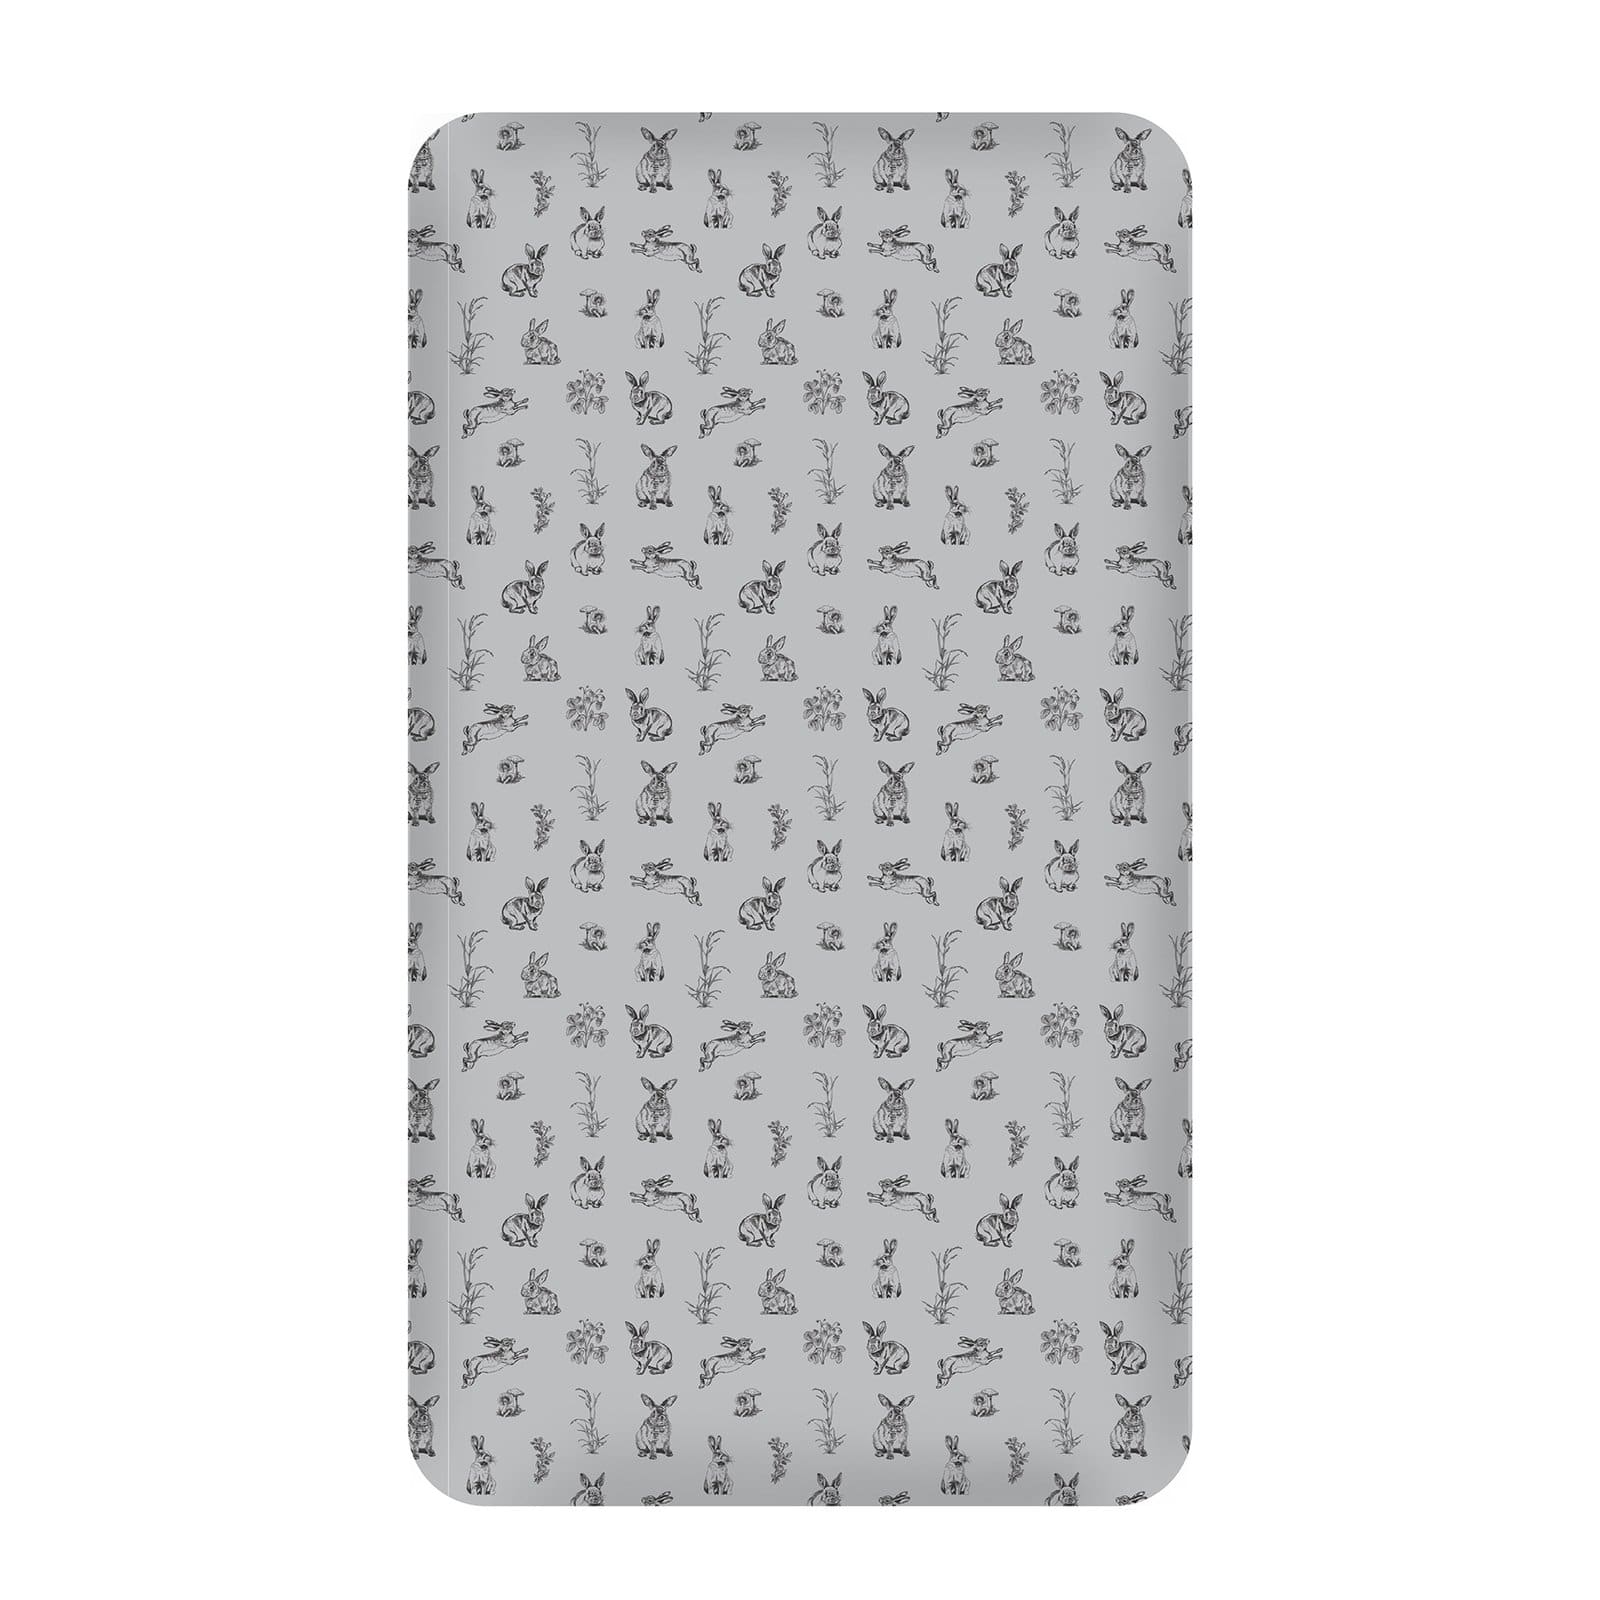 Parnell Baby Boutique Grey Burrowers Burrow & Be Fitted Cot Sheet